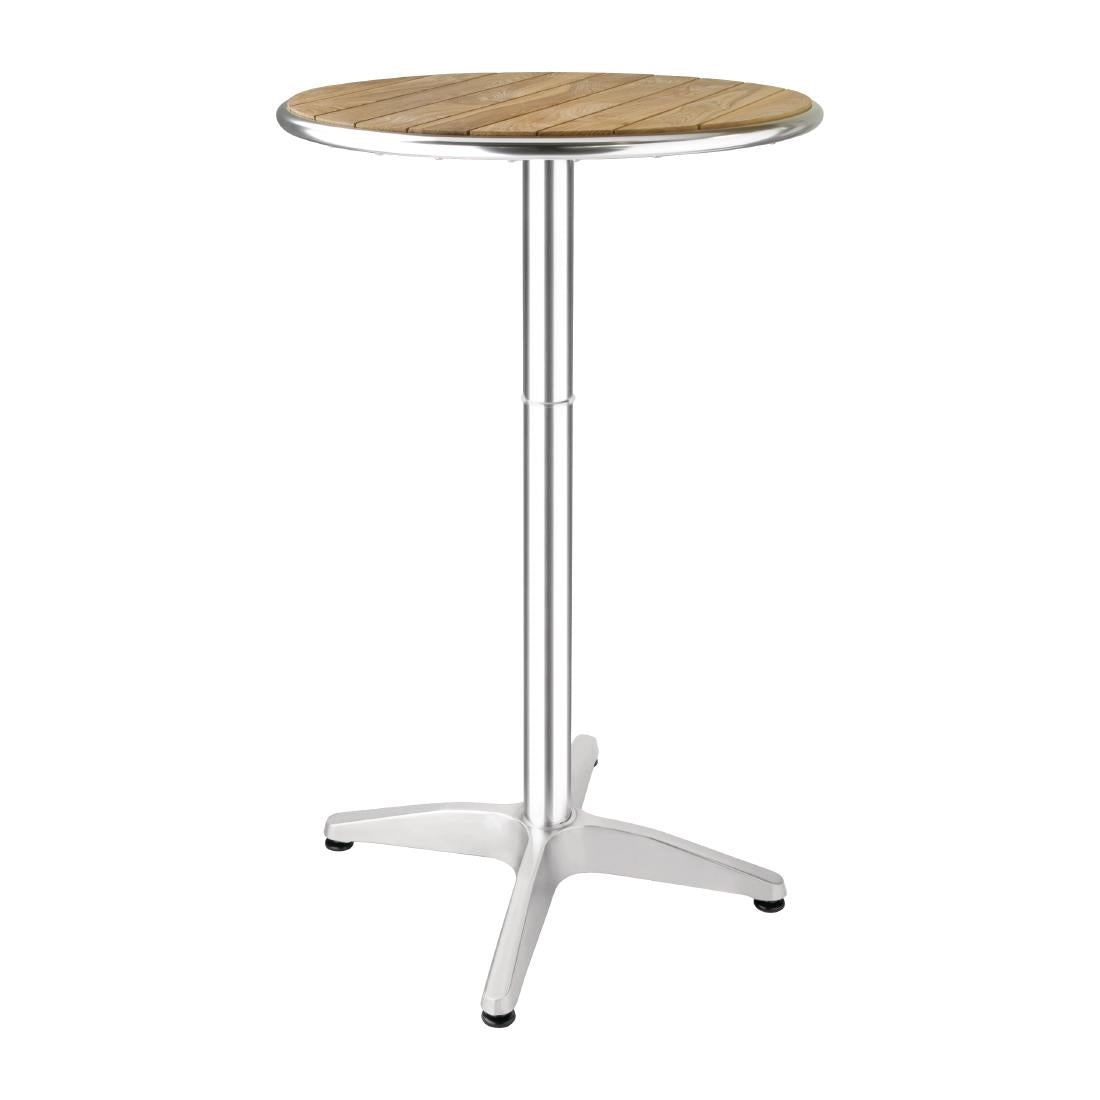 Bolero Ash Round Poseur Height Table 600mm JD Catering Equipment Solutions Ltd